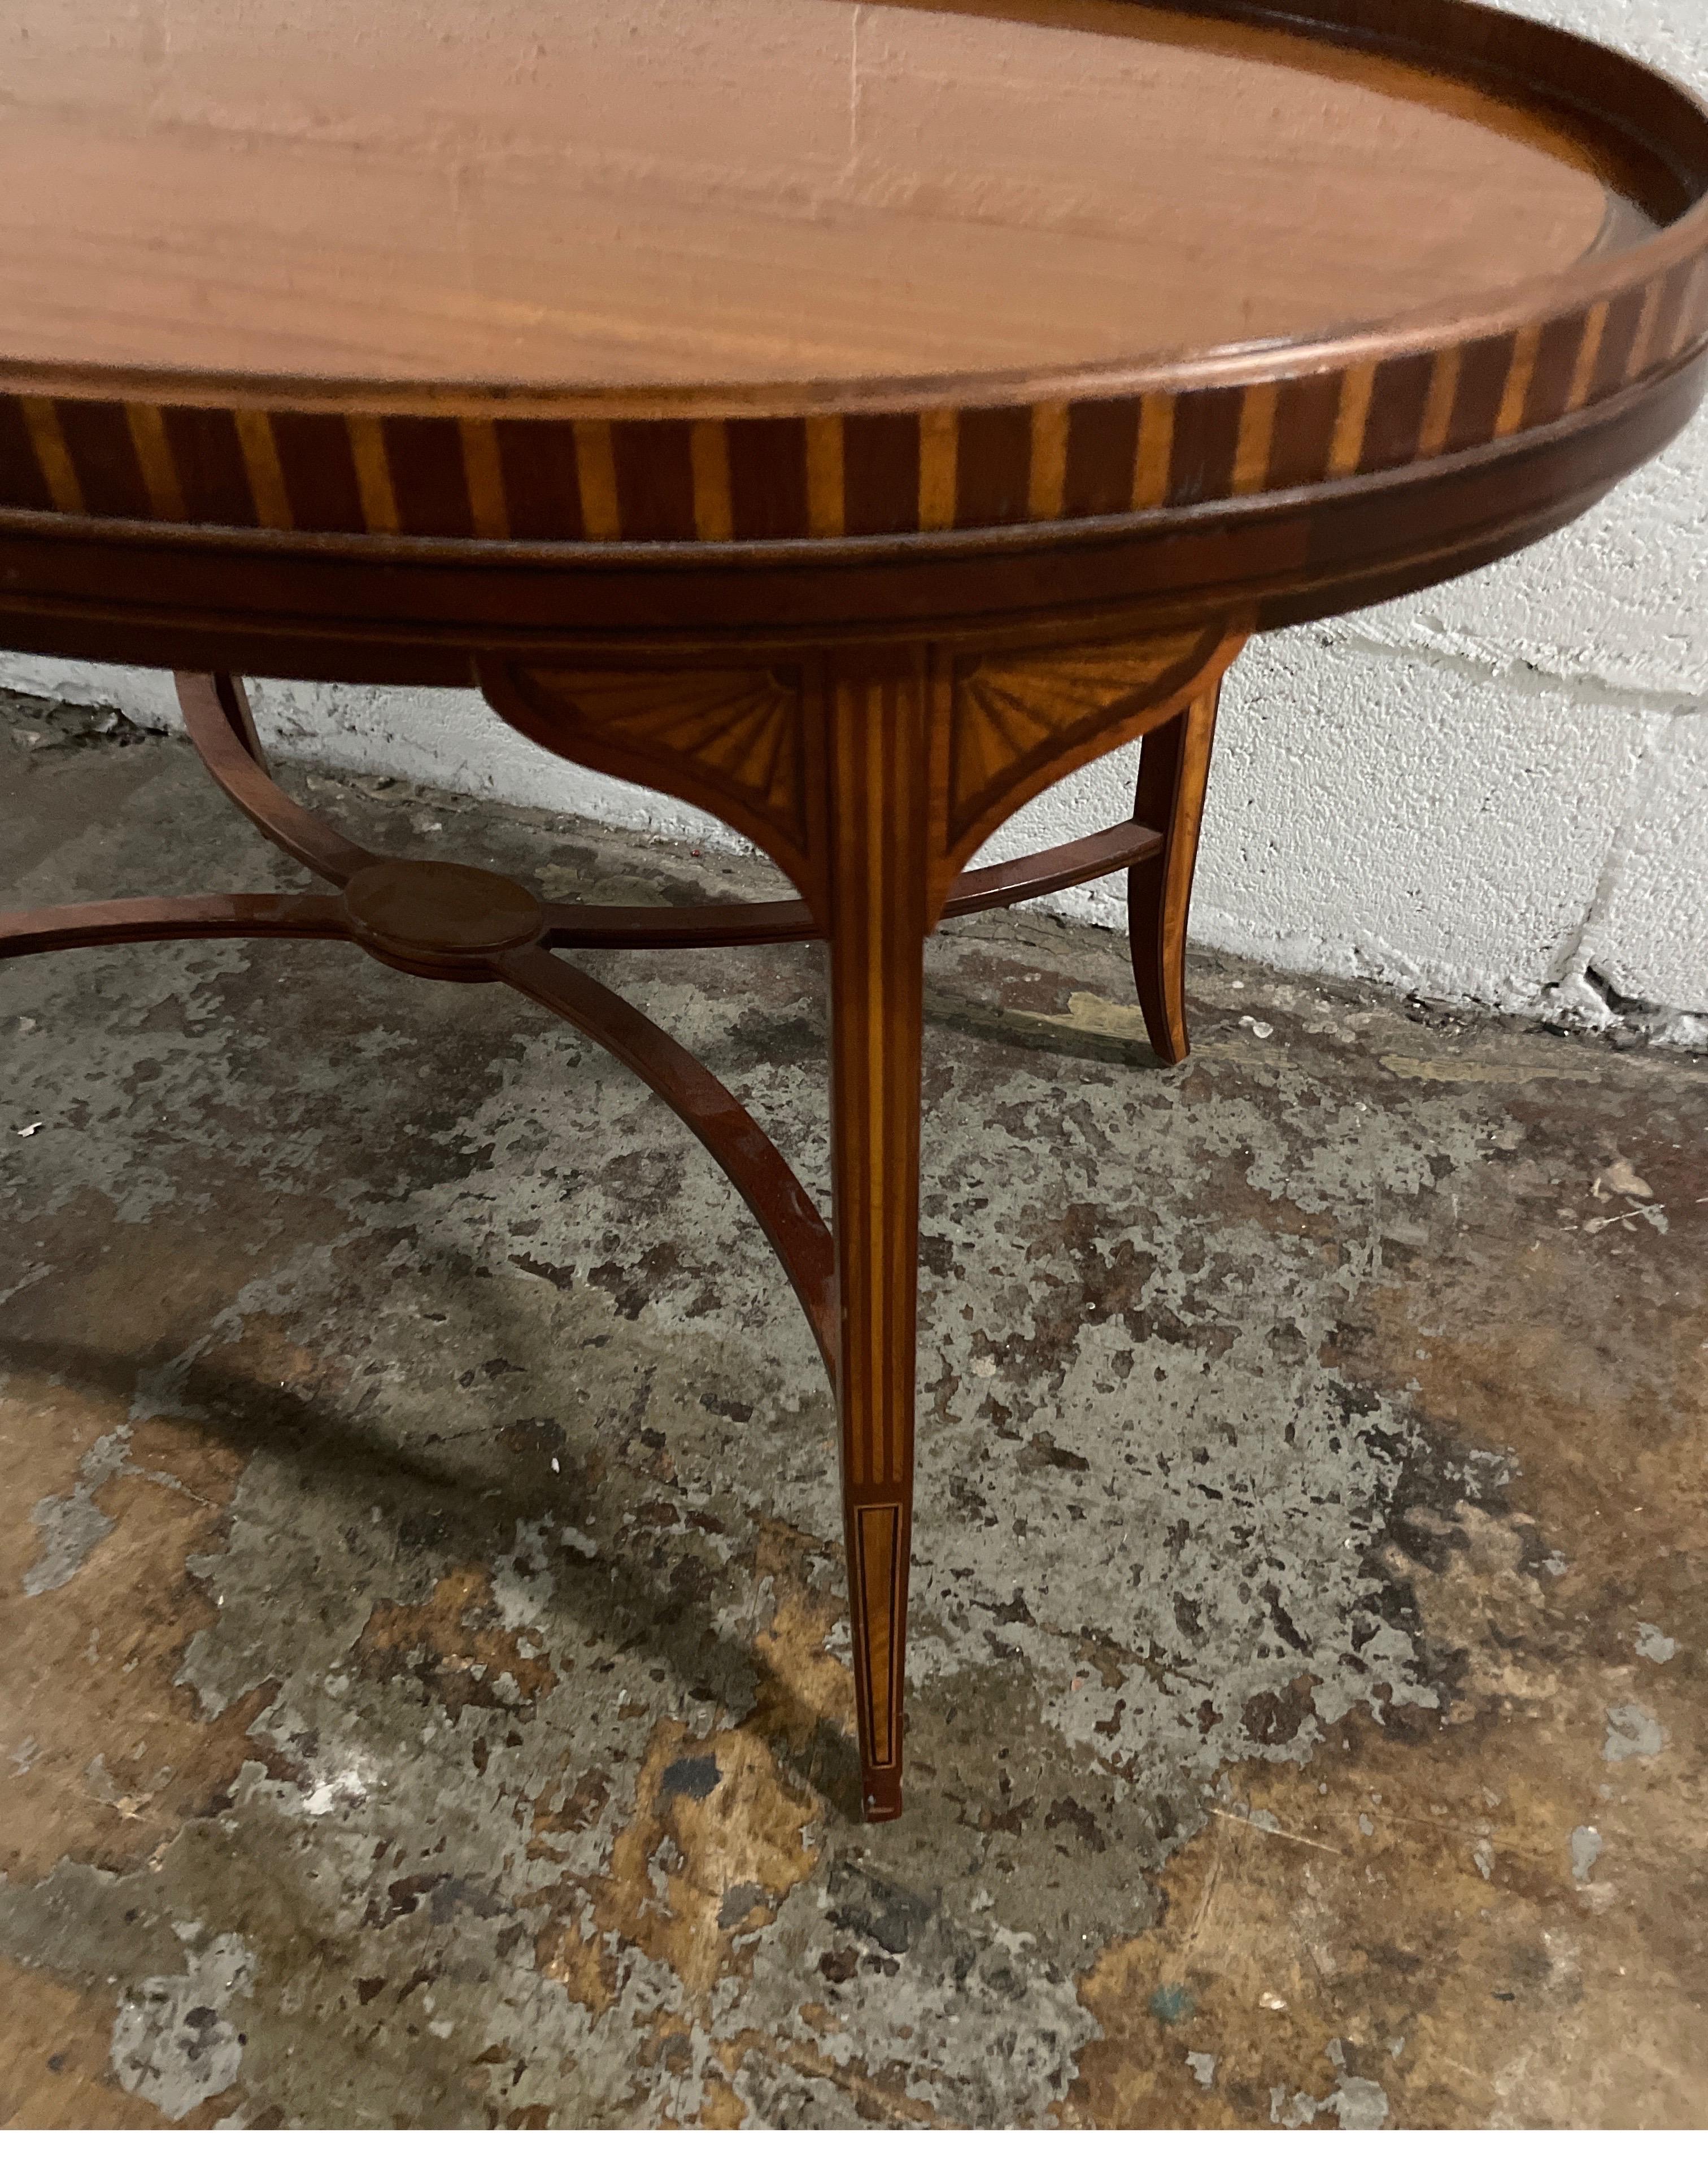 Handsome Butler's style coffee or tea table made by Baker for their Historical Charleston Collection. Made of mahogany and satinwood with brass handles. A beautiful addition to any room. Great attention to detail.